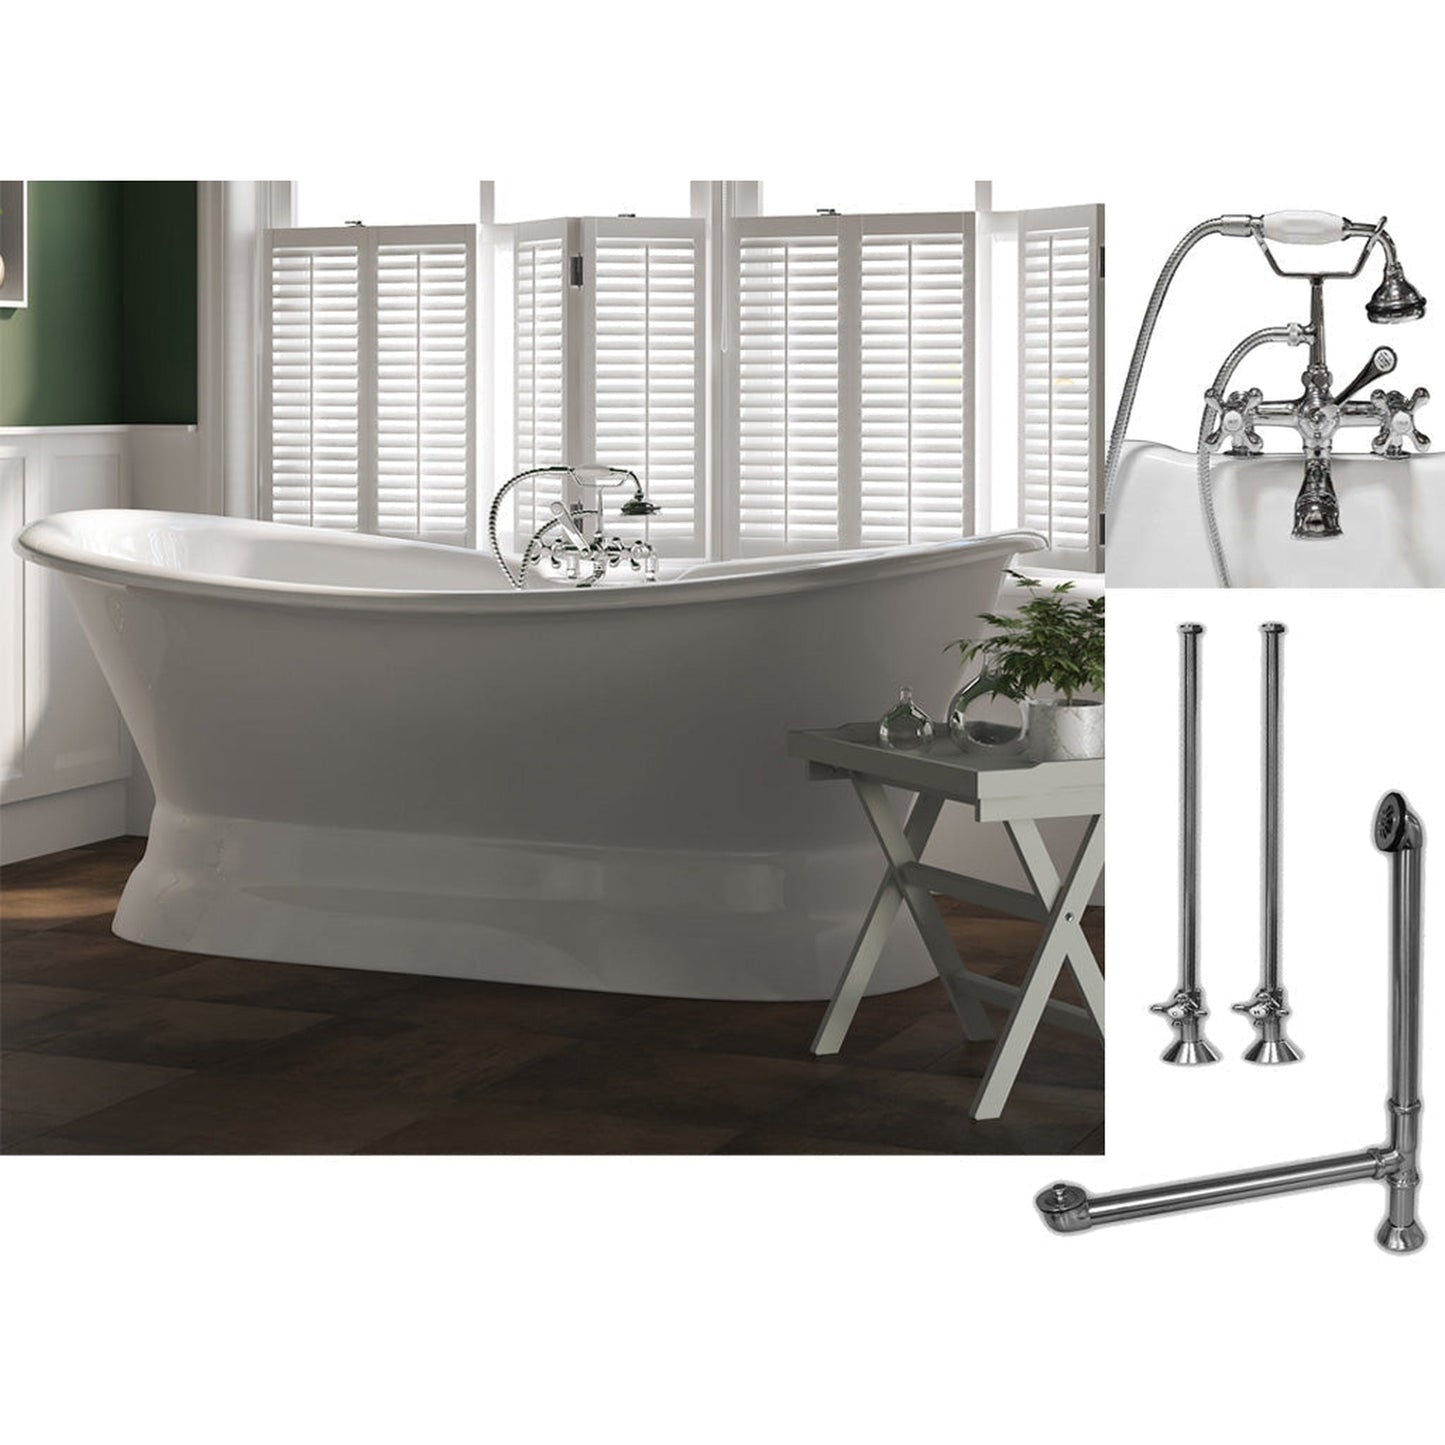 Cambridge Plumbing 71" White Cast Iron Double Slipper Pedestal Bathtub With Deck Holes And Complete Plumbing Package Including 2” Riser Deck Mount Faucet, Supply Lines, Drain And Overflow Assembly In Polished Chrome